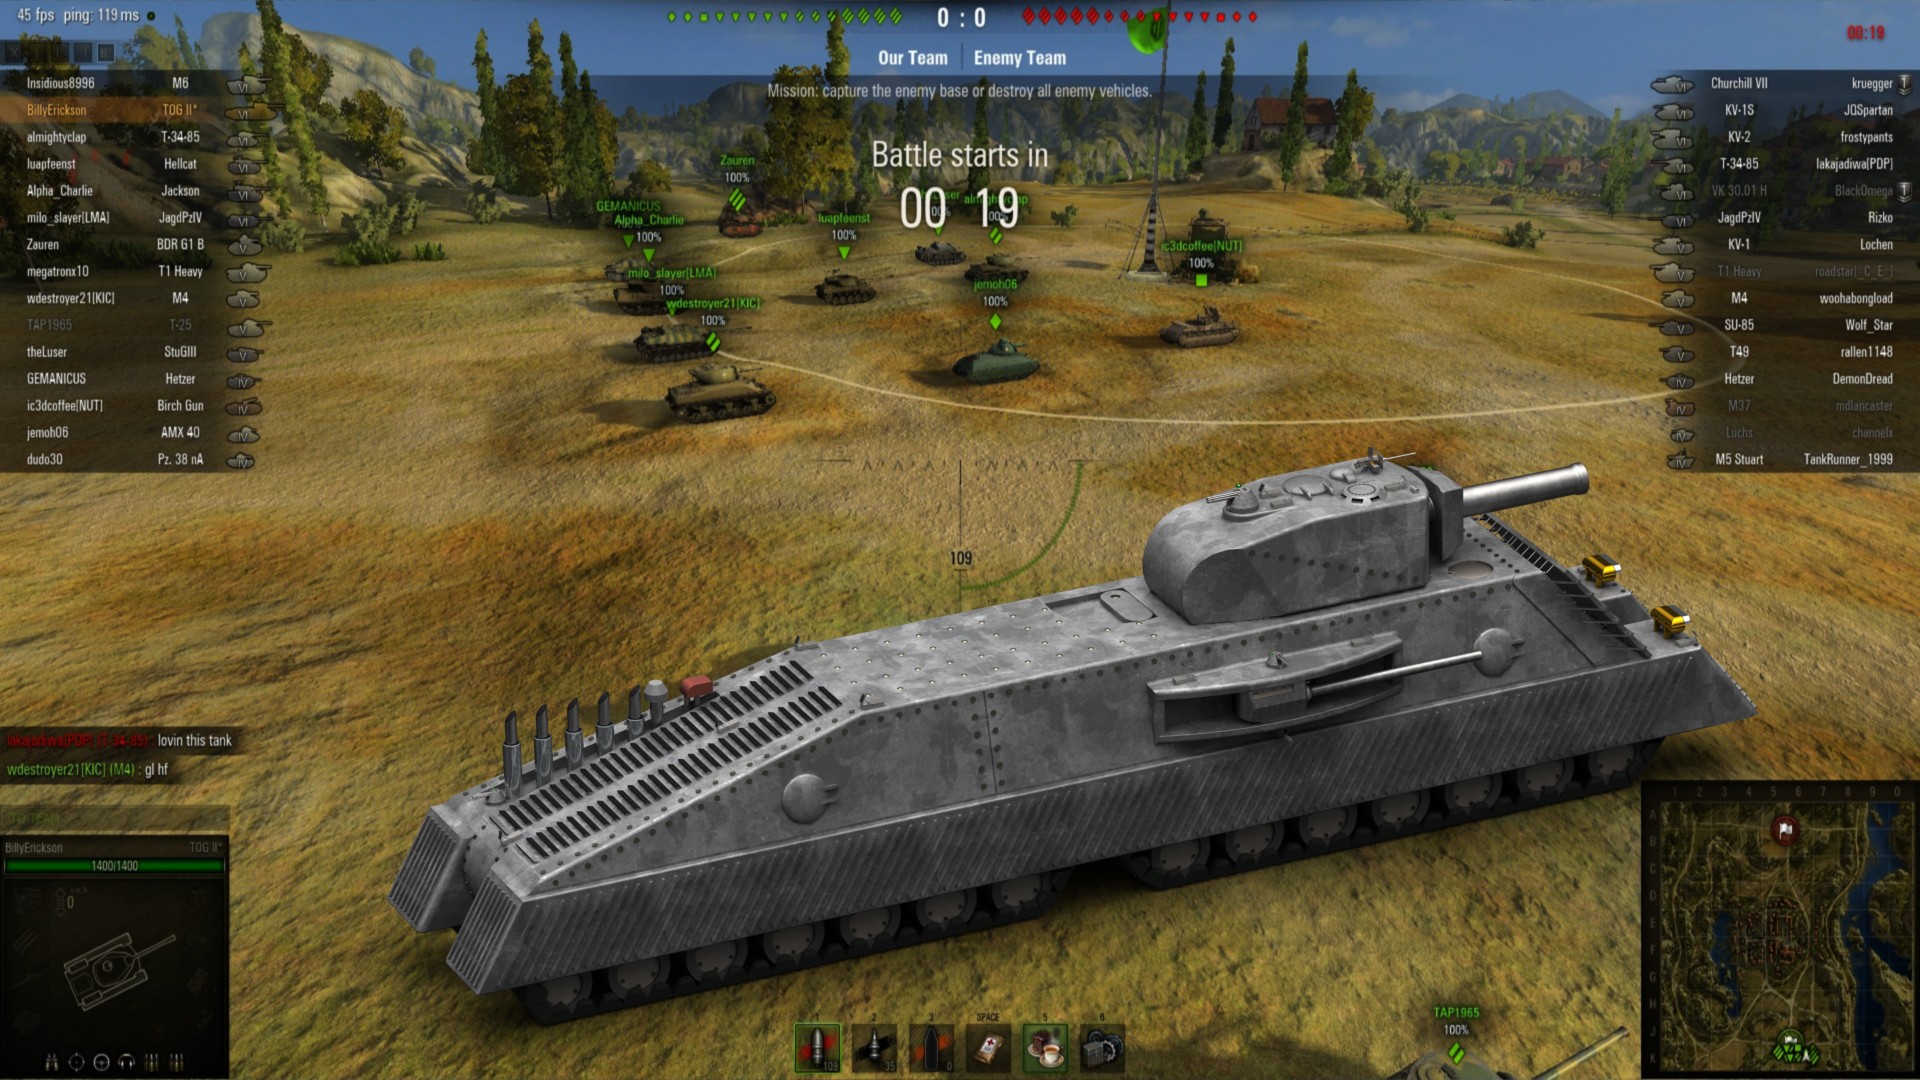 Imagine the P.1000 Ratte Landkreuzer in WoT - Off-Topic - World of